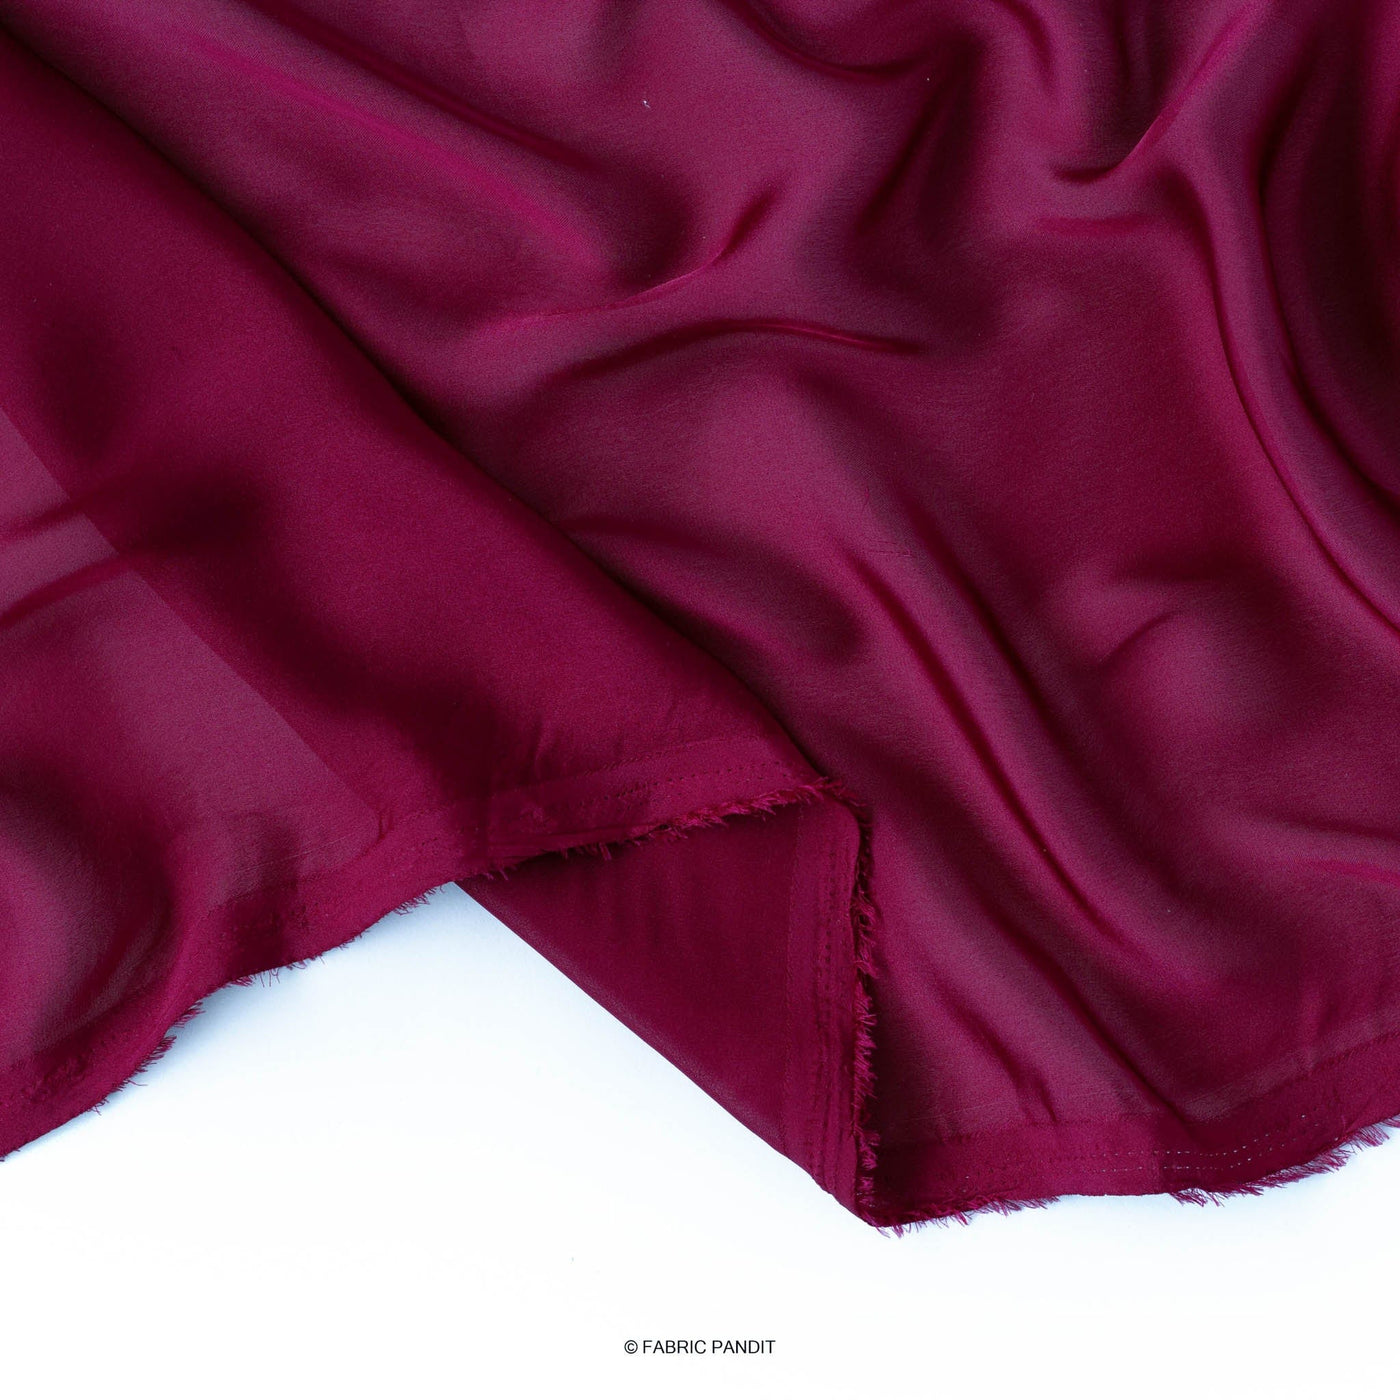 Fabric Pandit Fabric Mulberry Color Plain Satin Georgette Fabric (Width 44 Inches)